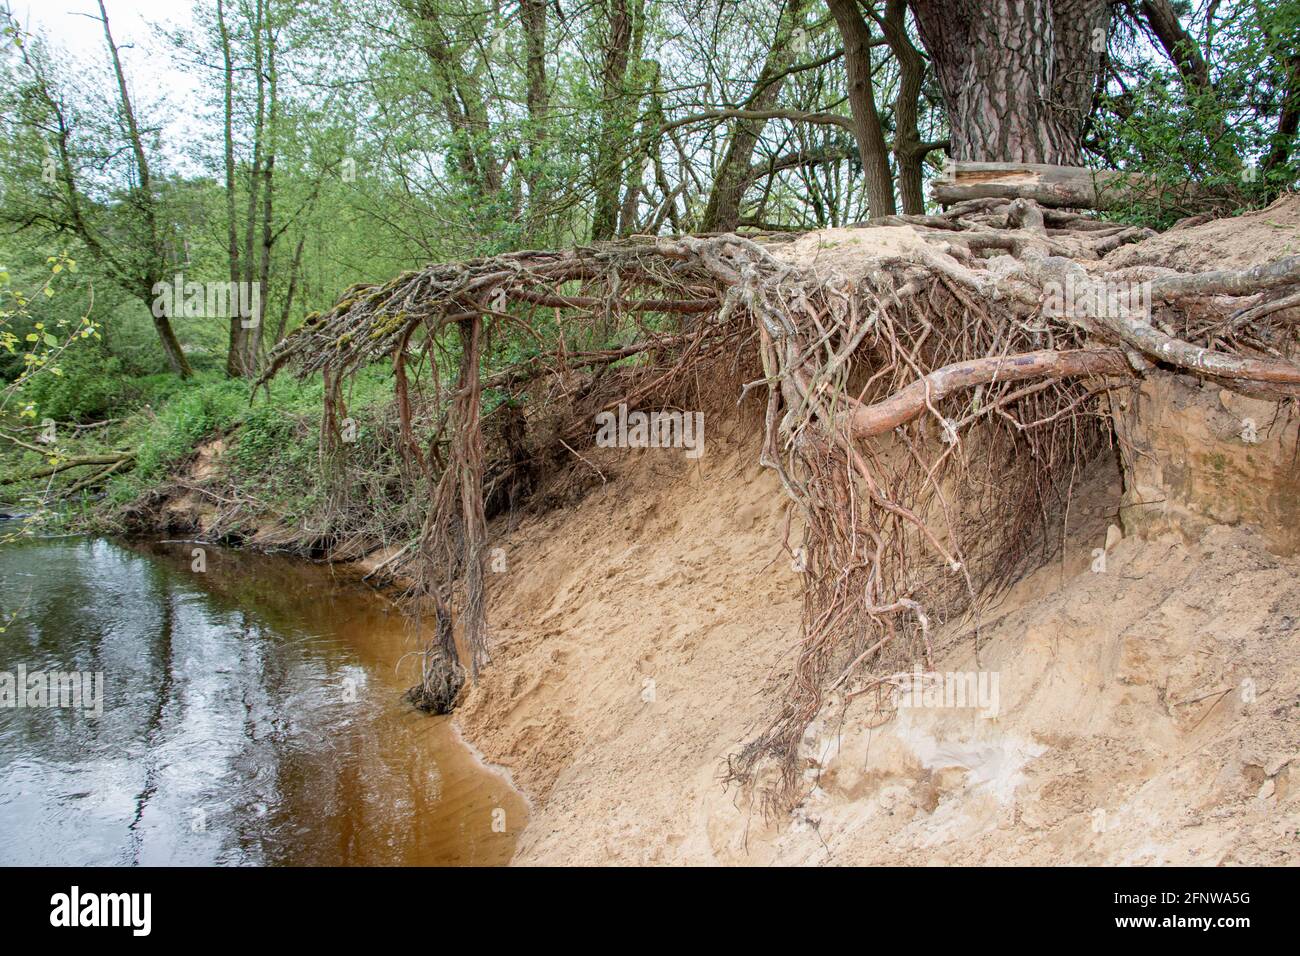 A narrow river called 'Dinkel' and washed away soil around the tree roots in the region of Twente, province of Overijsel, the Netherlands Stock Photo